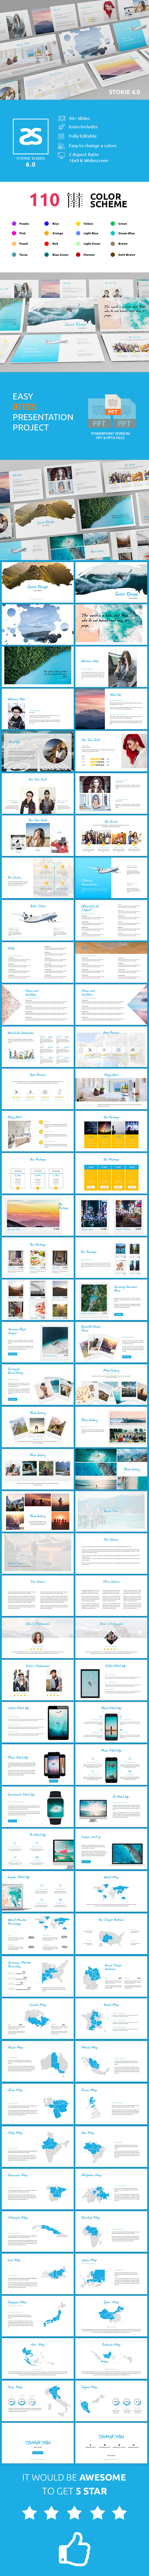 GraphicRiver Travel Agency Powerpoint Template 6.0 20859633